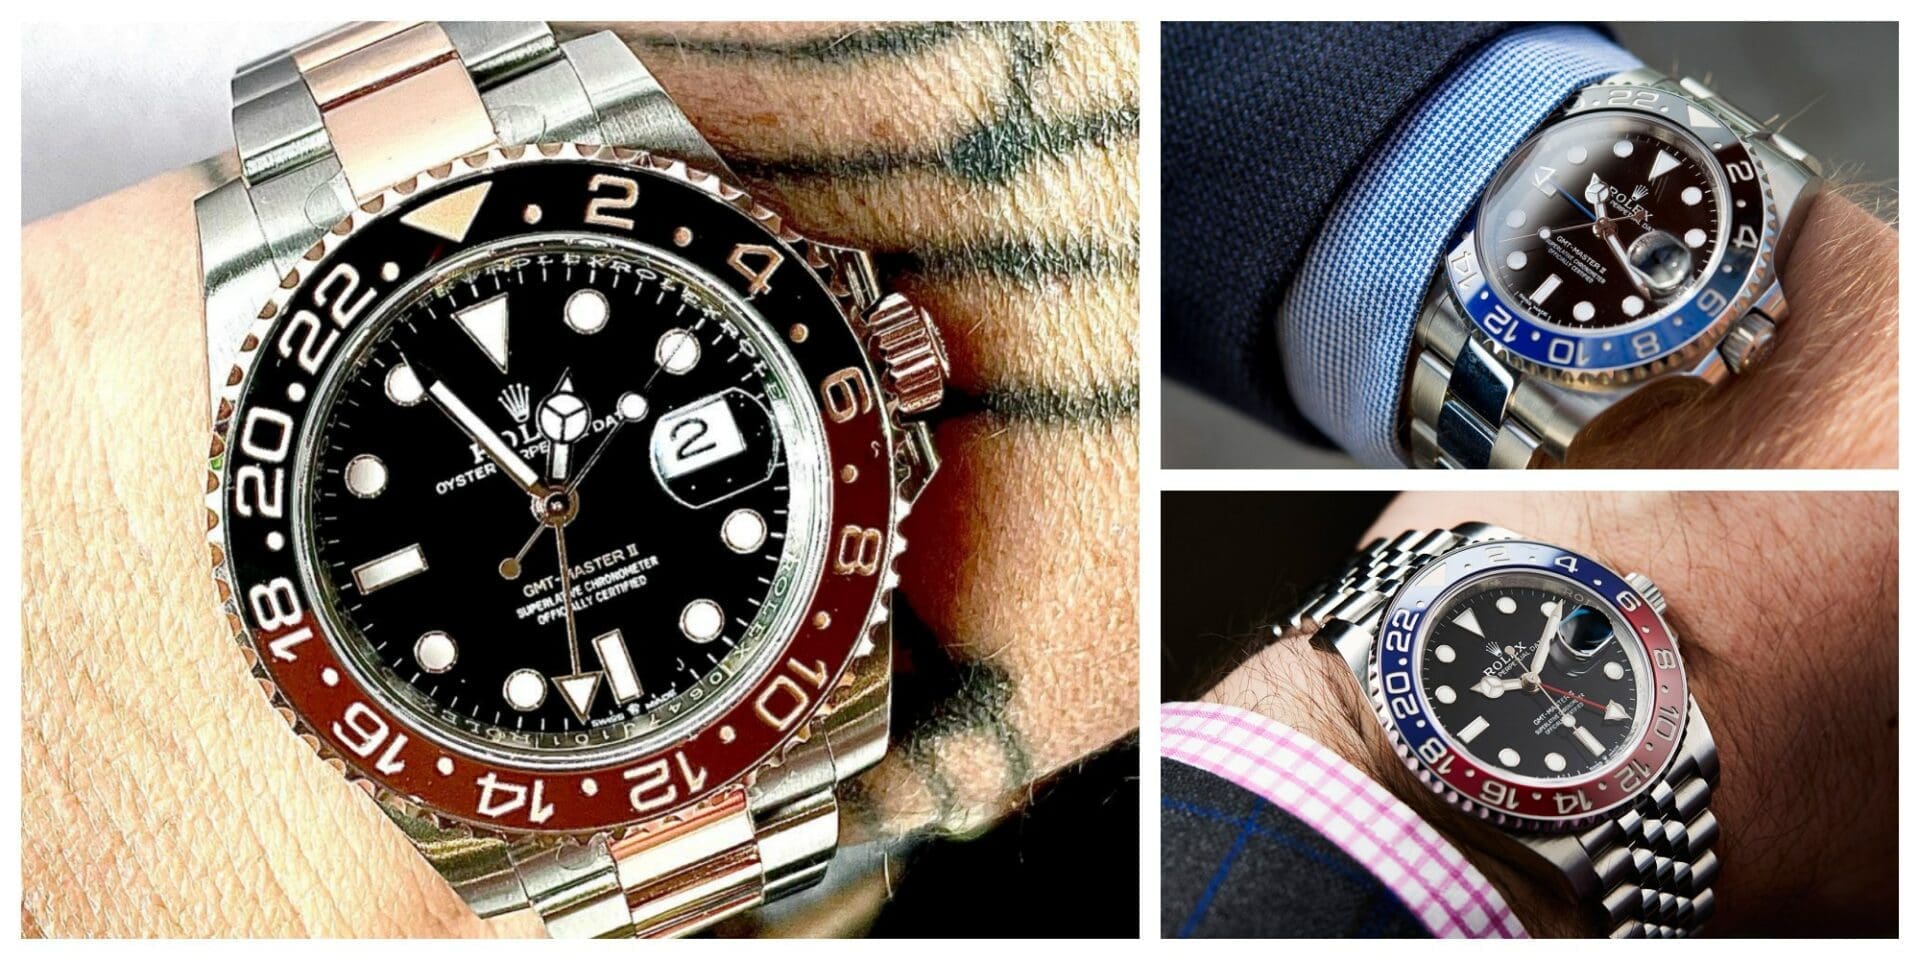 Ruminations on my Rolex GMT journey